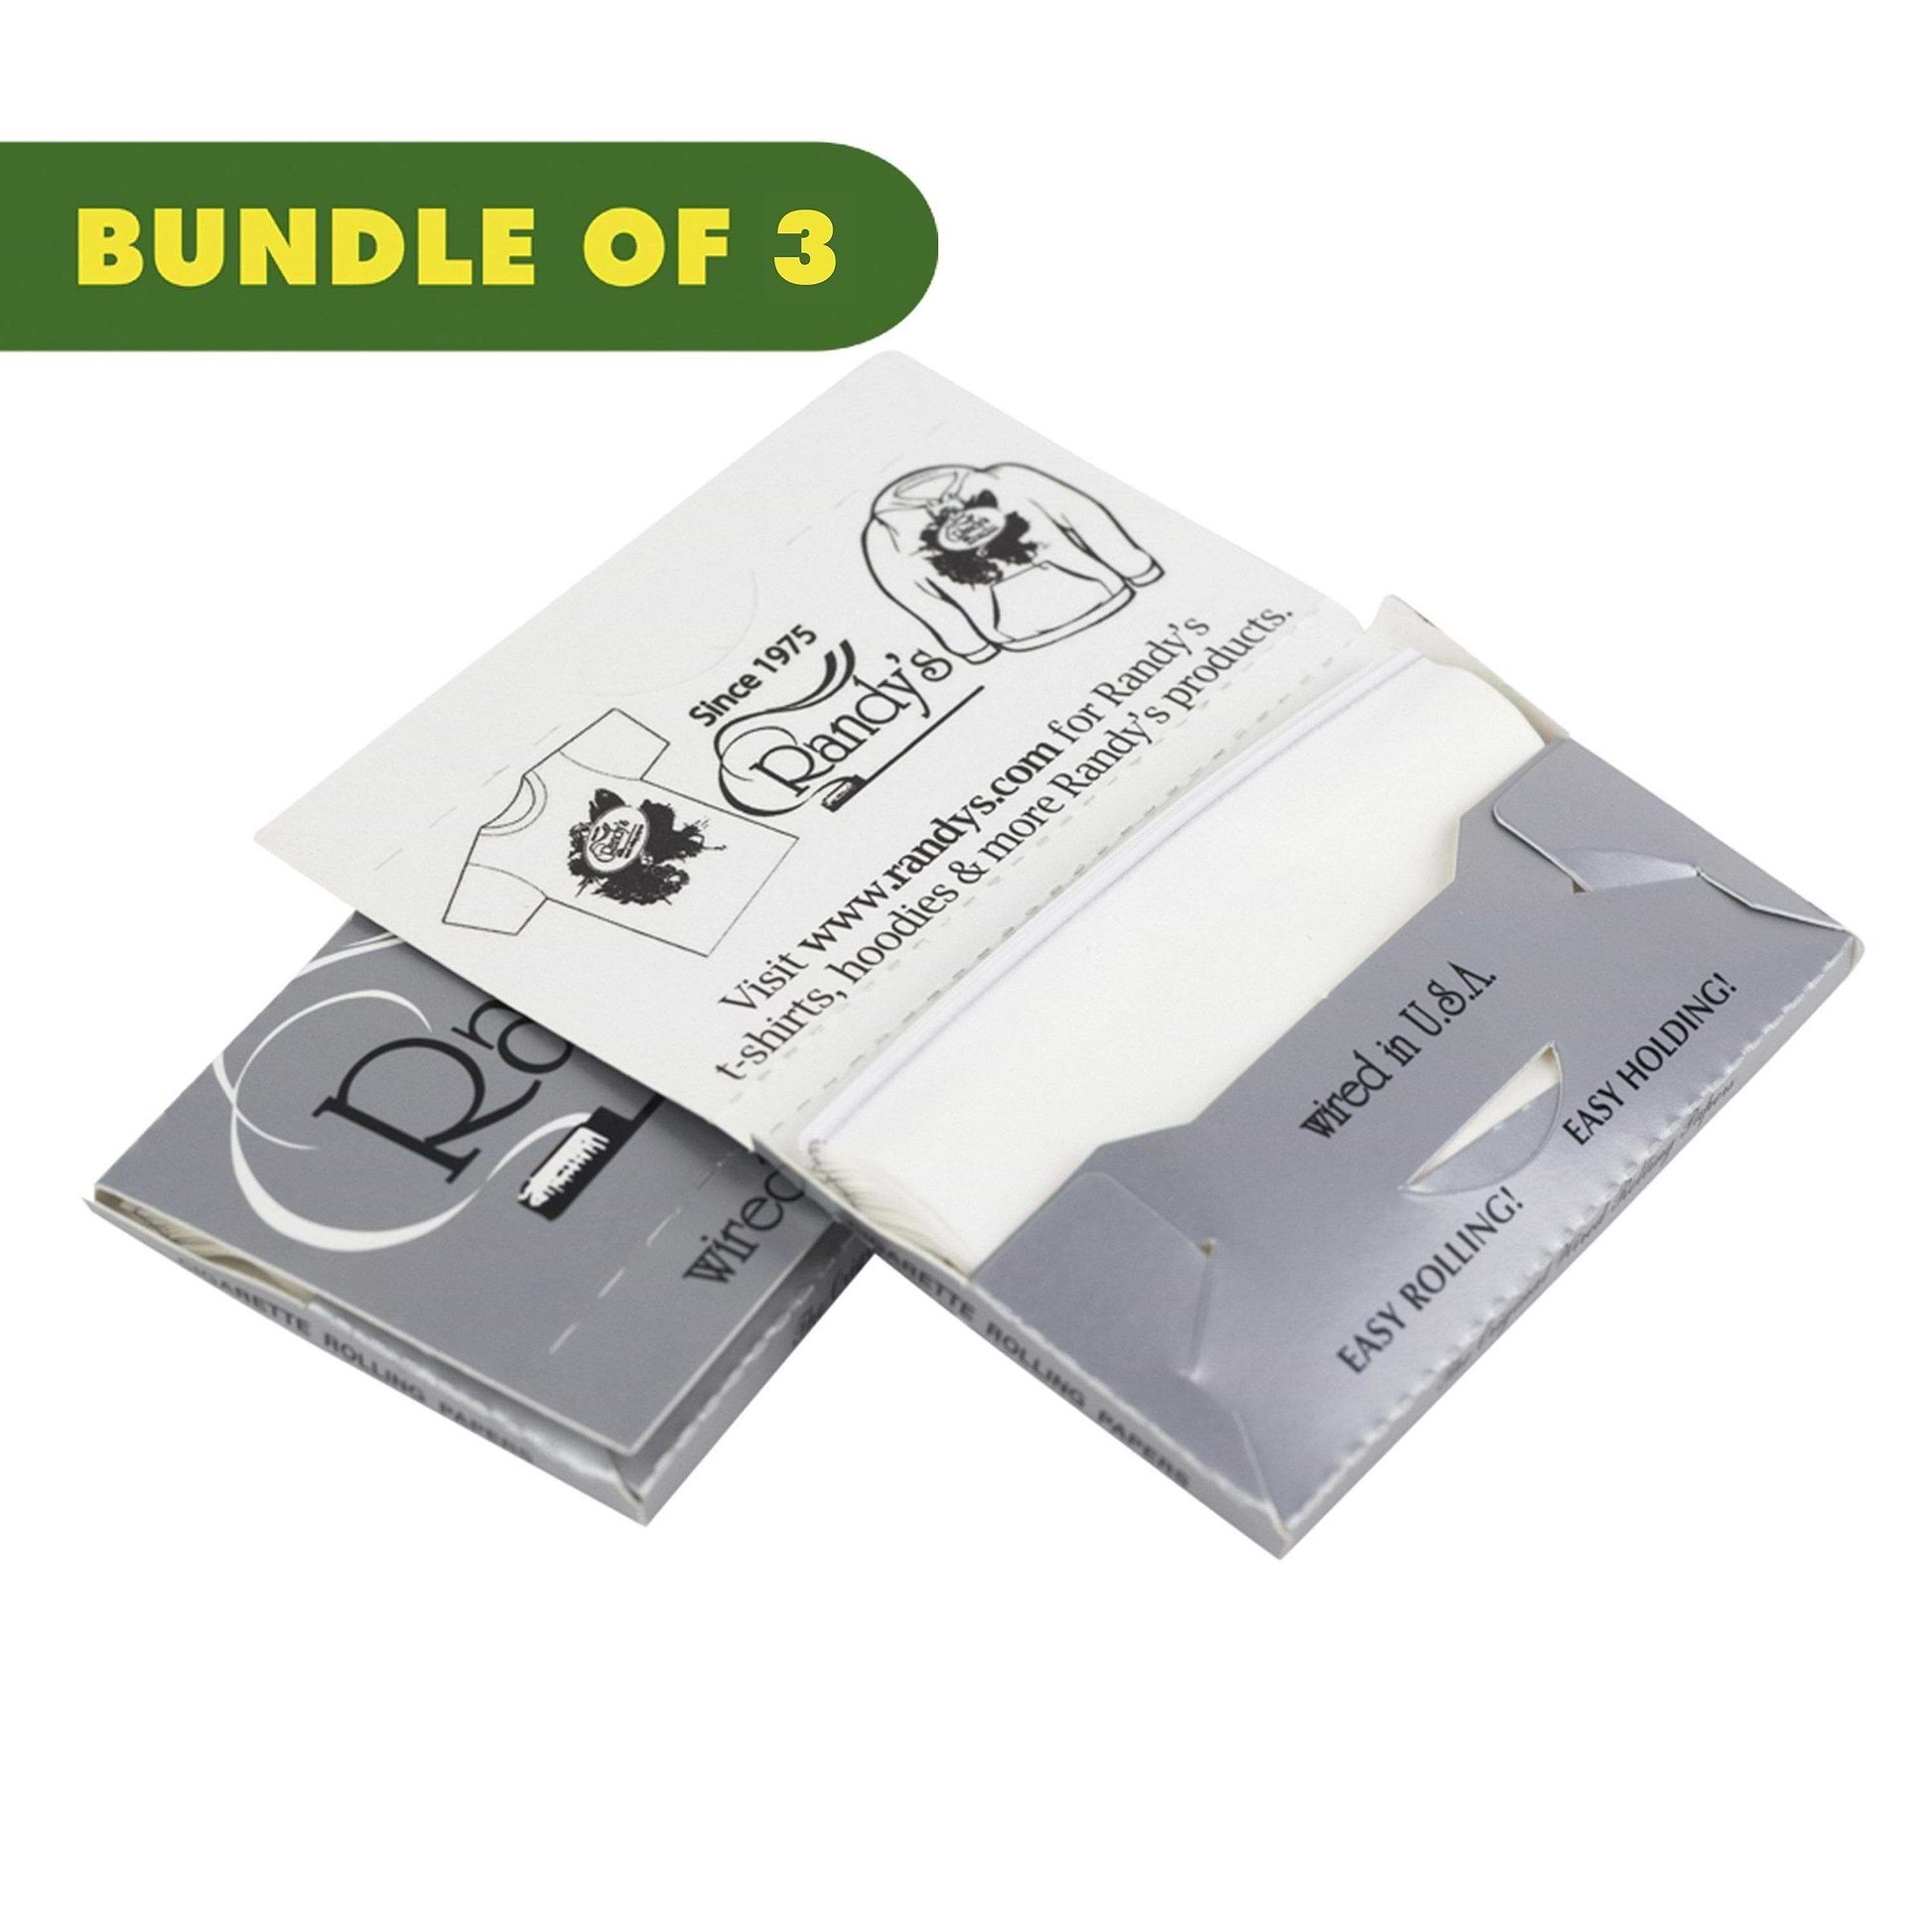 Handy wired rolling paper tips weed filtration smoking accessory with classic Randy's logo packed like oil-blotting sheets